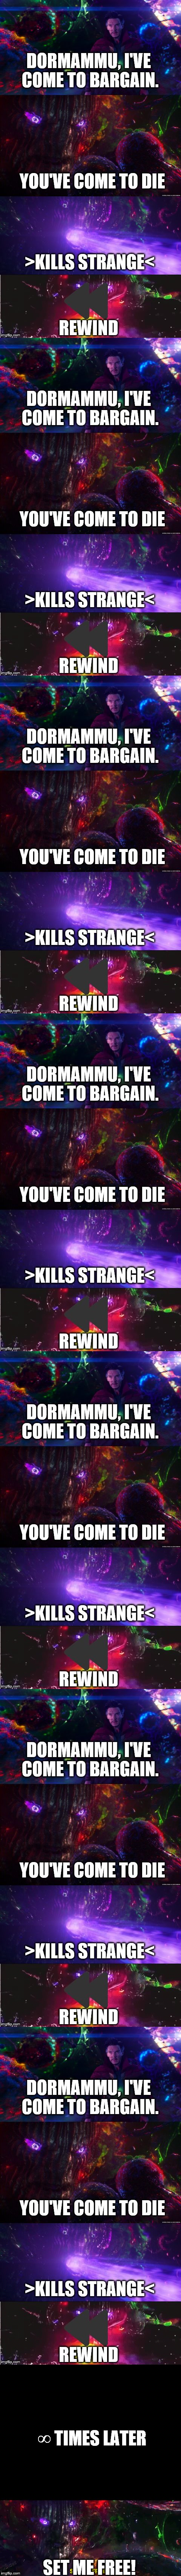 This is time. Endless looped time. | ∞ TIMES LATER; SET ME FREE! | image tagged in memes,funny,funny memes,doctor strange,dormammu ive come to bargain,dr strange | made w/ Imgflip meme maker